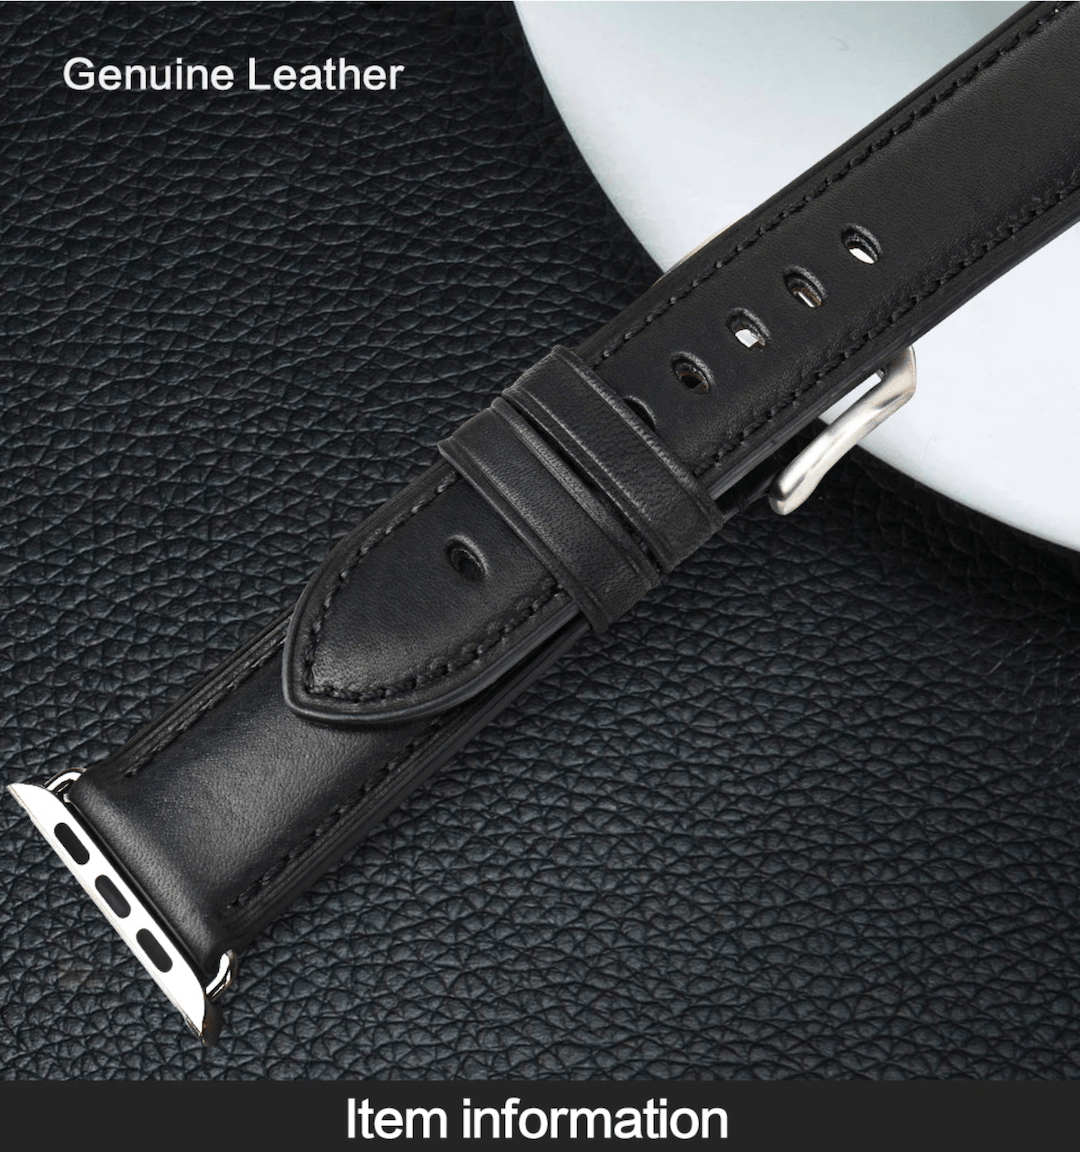 Genuine leather apple watch premium high quality straps in india